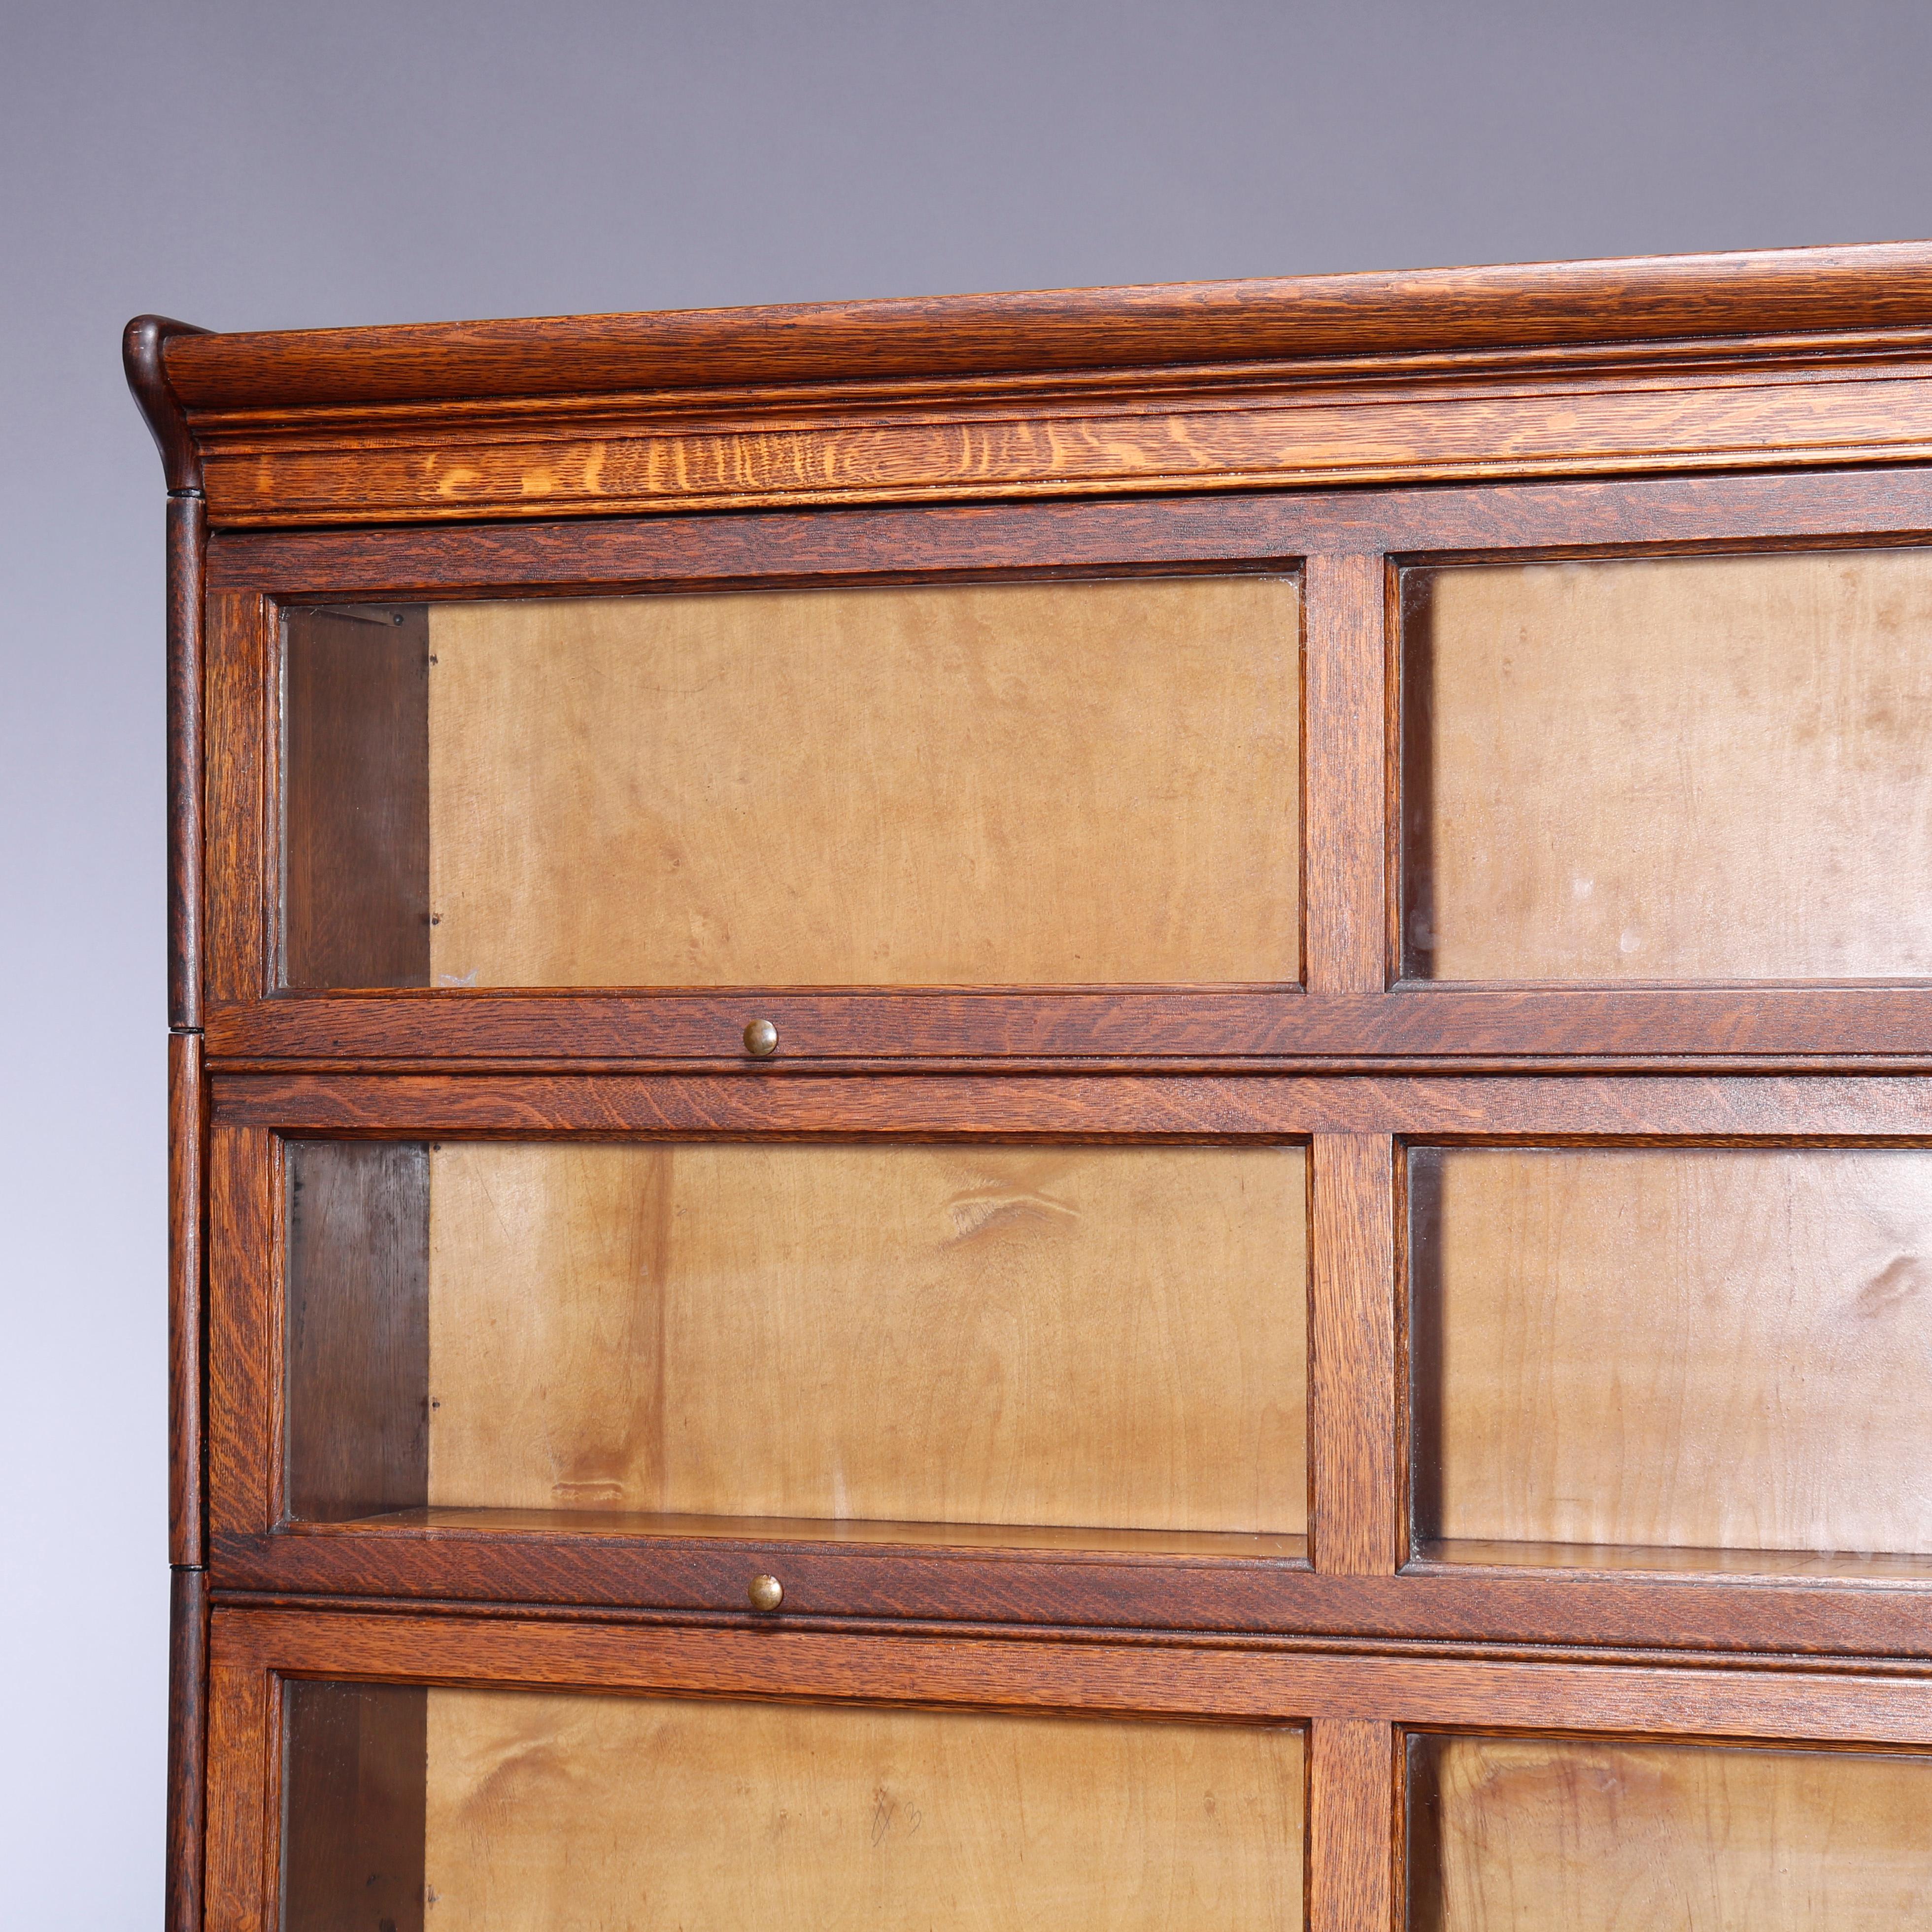 An antique Arts & Crafts Mission barrister bookcase by Gunn offers quarter sawn oak construction with six double-length stacks, each having a pull-out glass door and seated on ogee base, C1910

Measures: 81